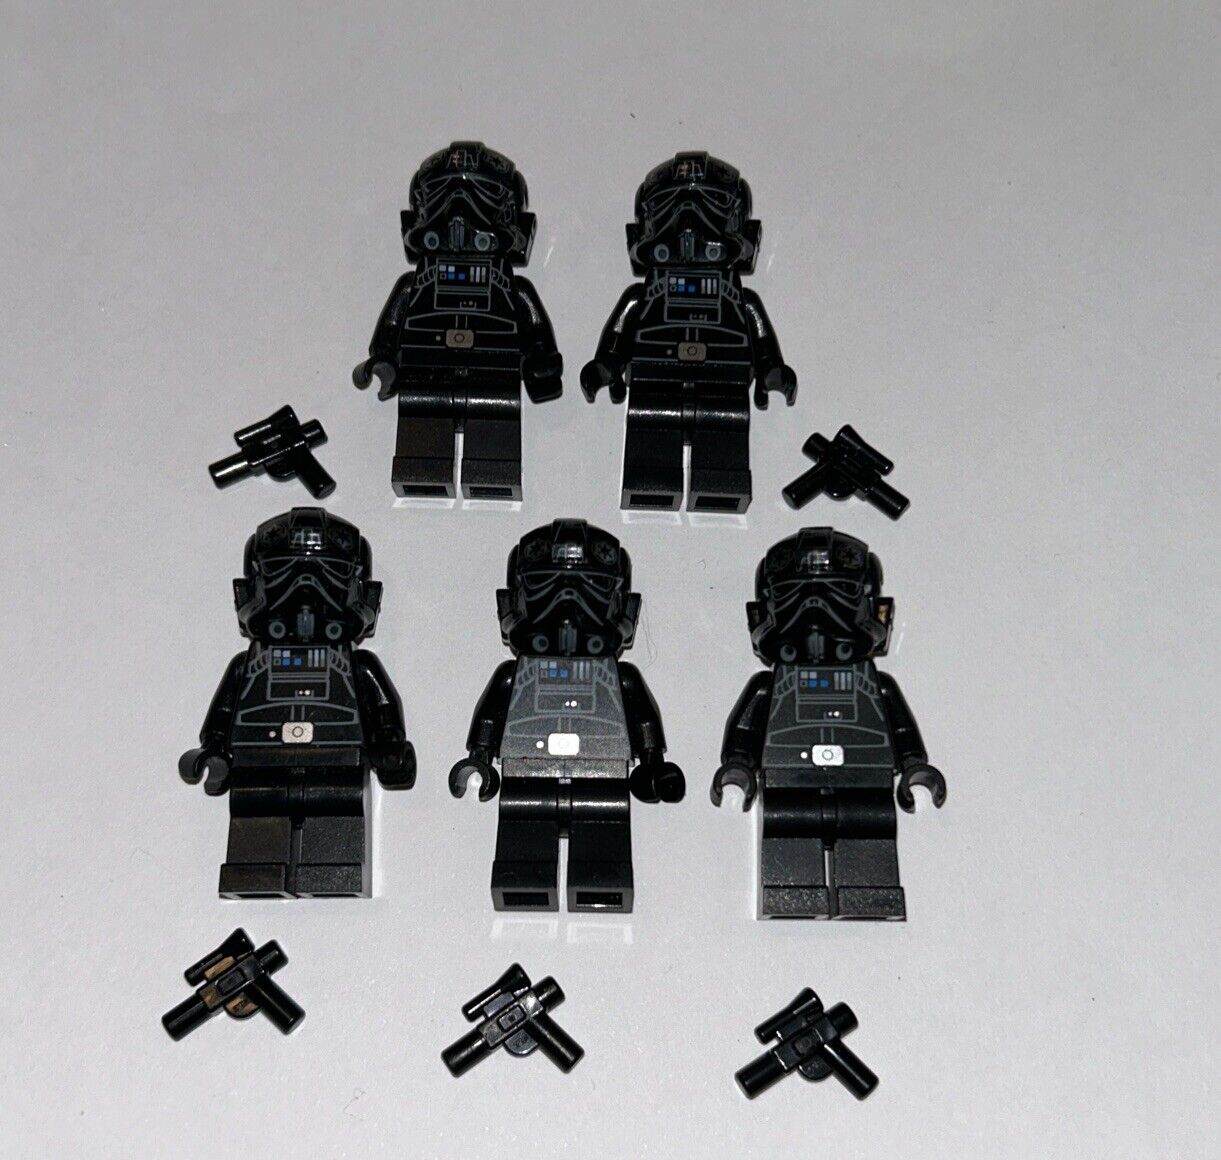 Lego Star Wars Rebels Lot of 5 Minifigures - Imperial TIE Fighter Pilot 75106